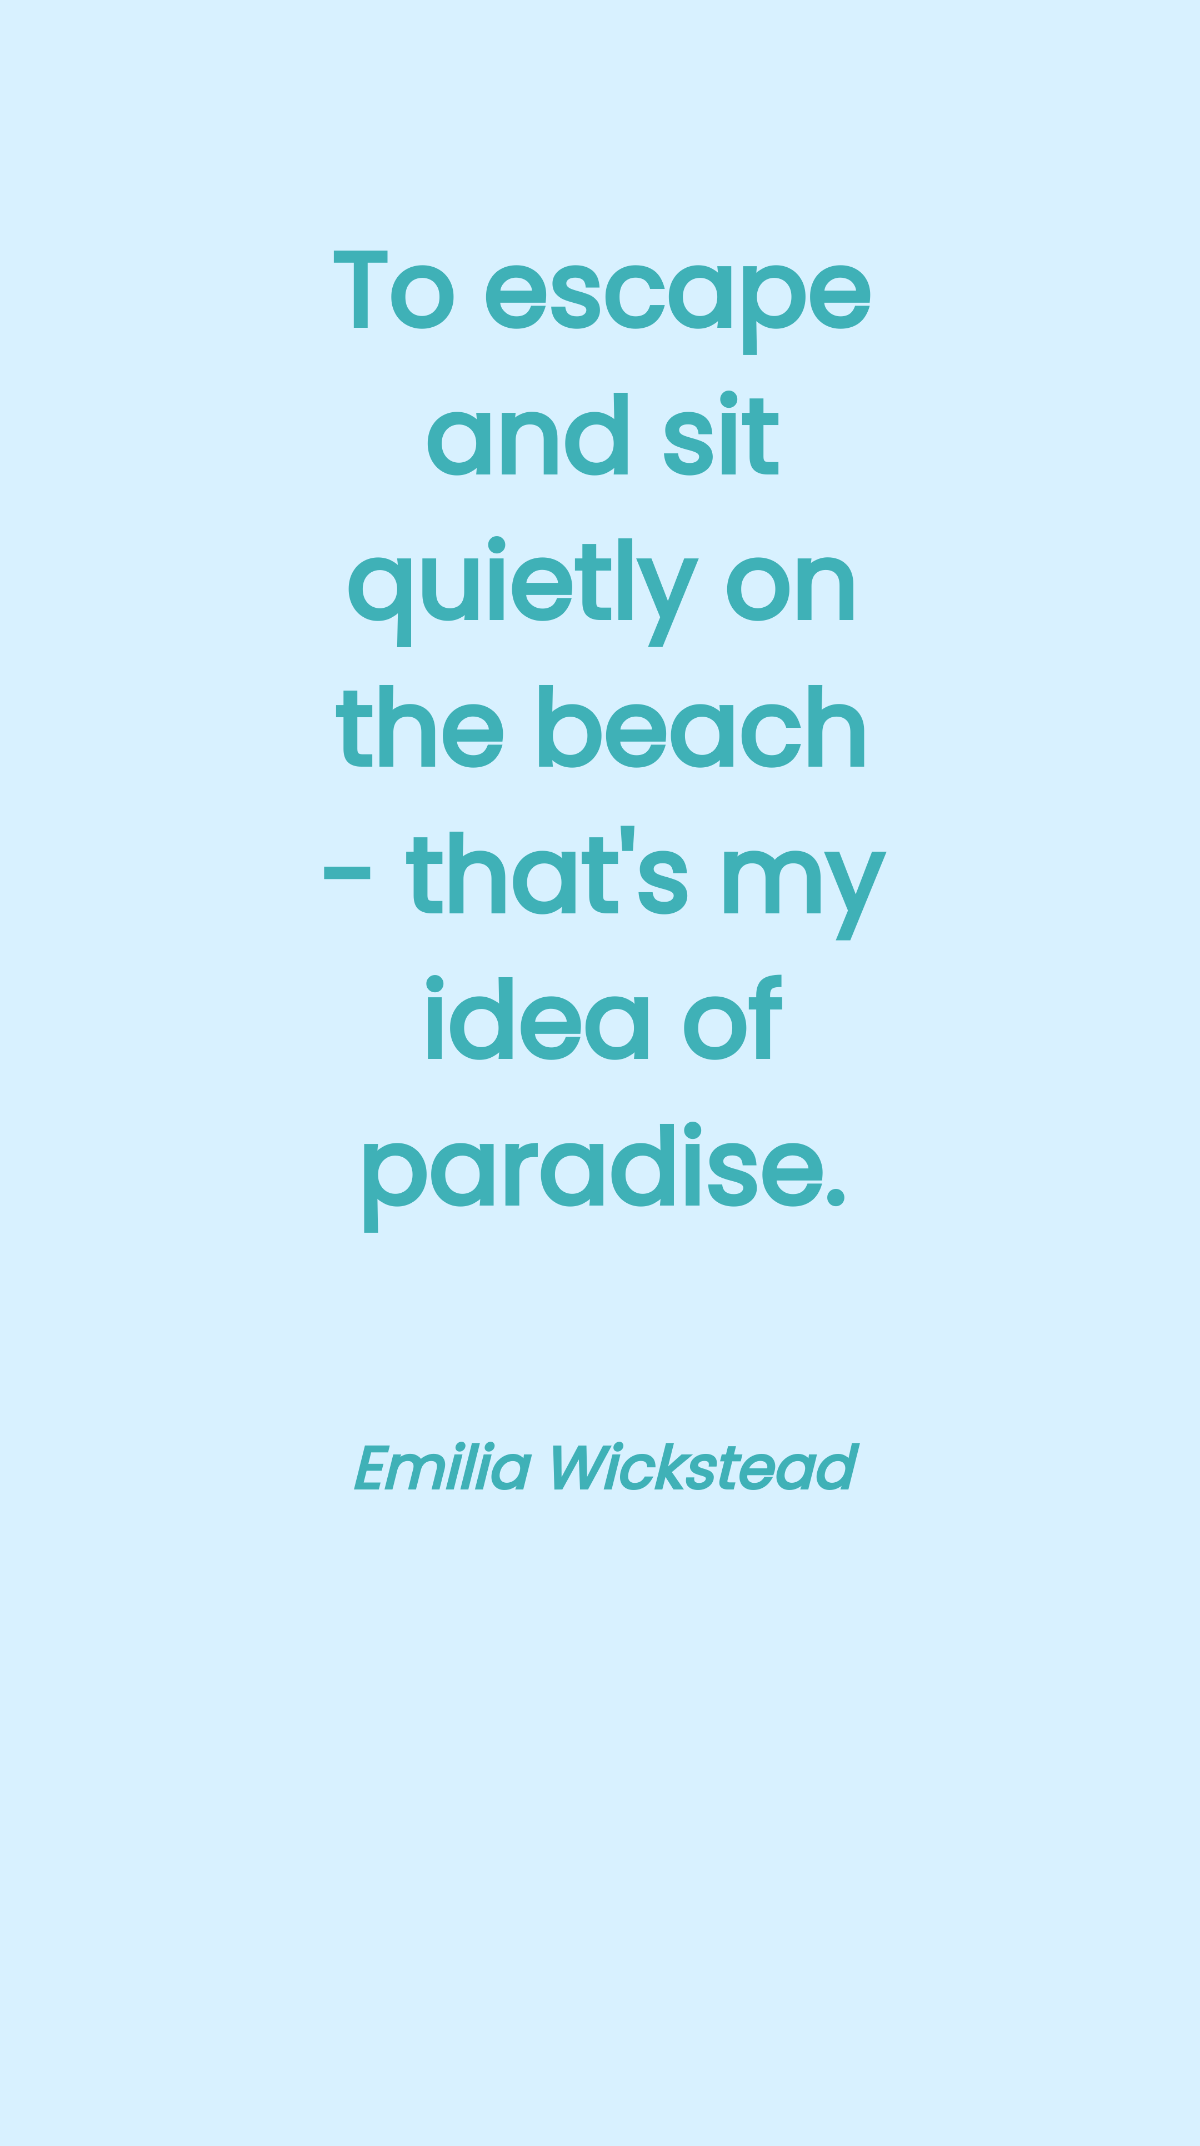 Emilia Wickstead - To escape and sit quietly on the beach - that's my idea of paradise.